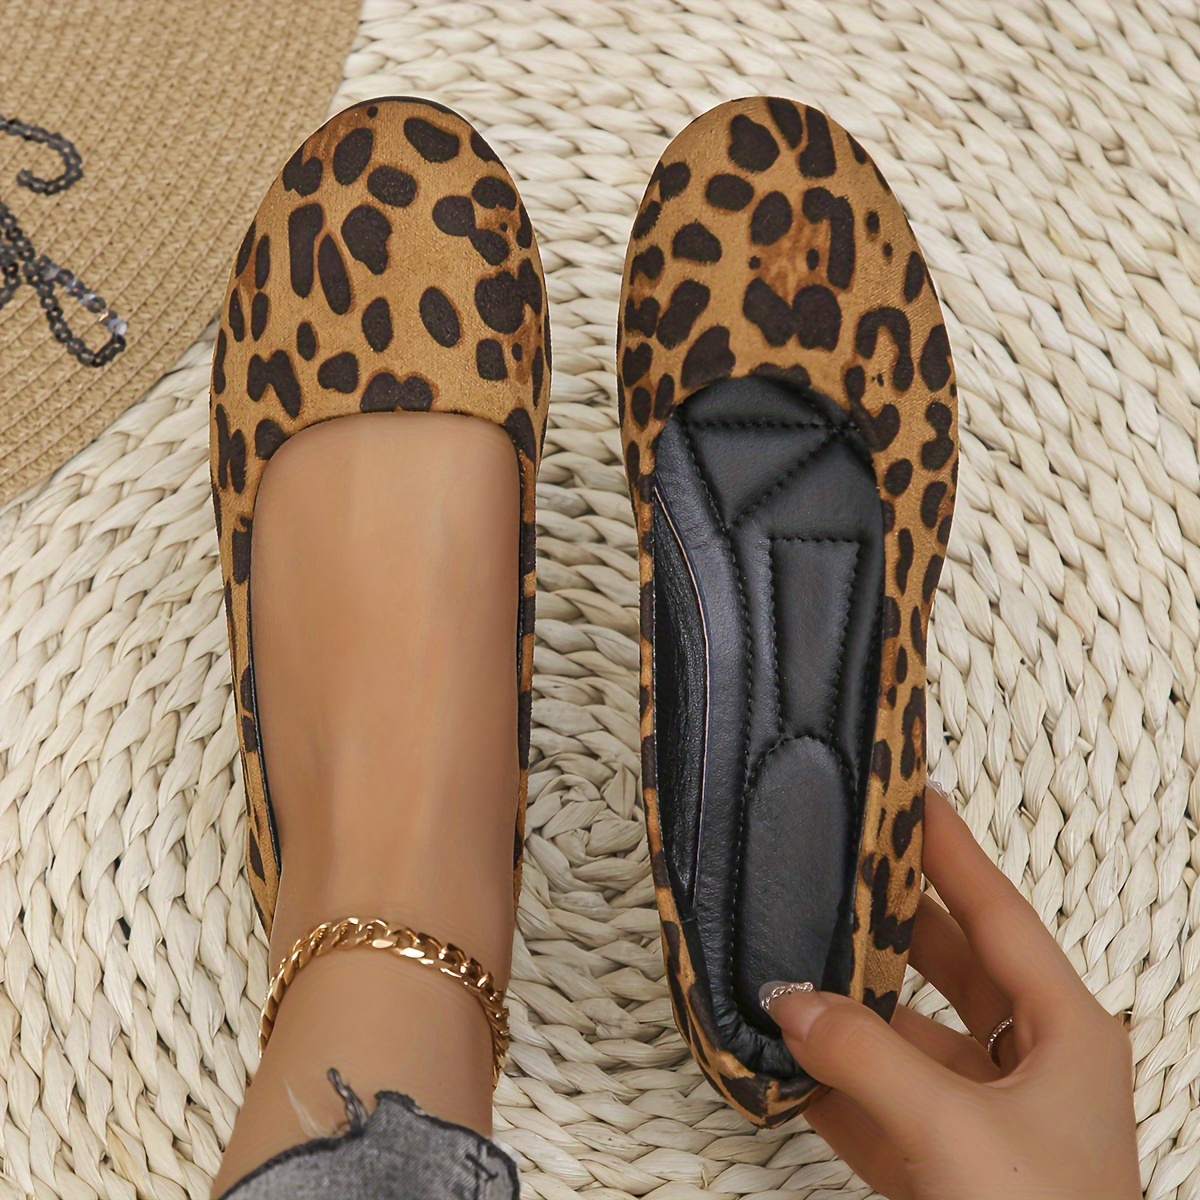 Women's Leopard & Zebra Printed Shoes, Slip On Low-top Round Toe Flat  Lightweight Shoes, Comfy Casual Daily Shoes